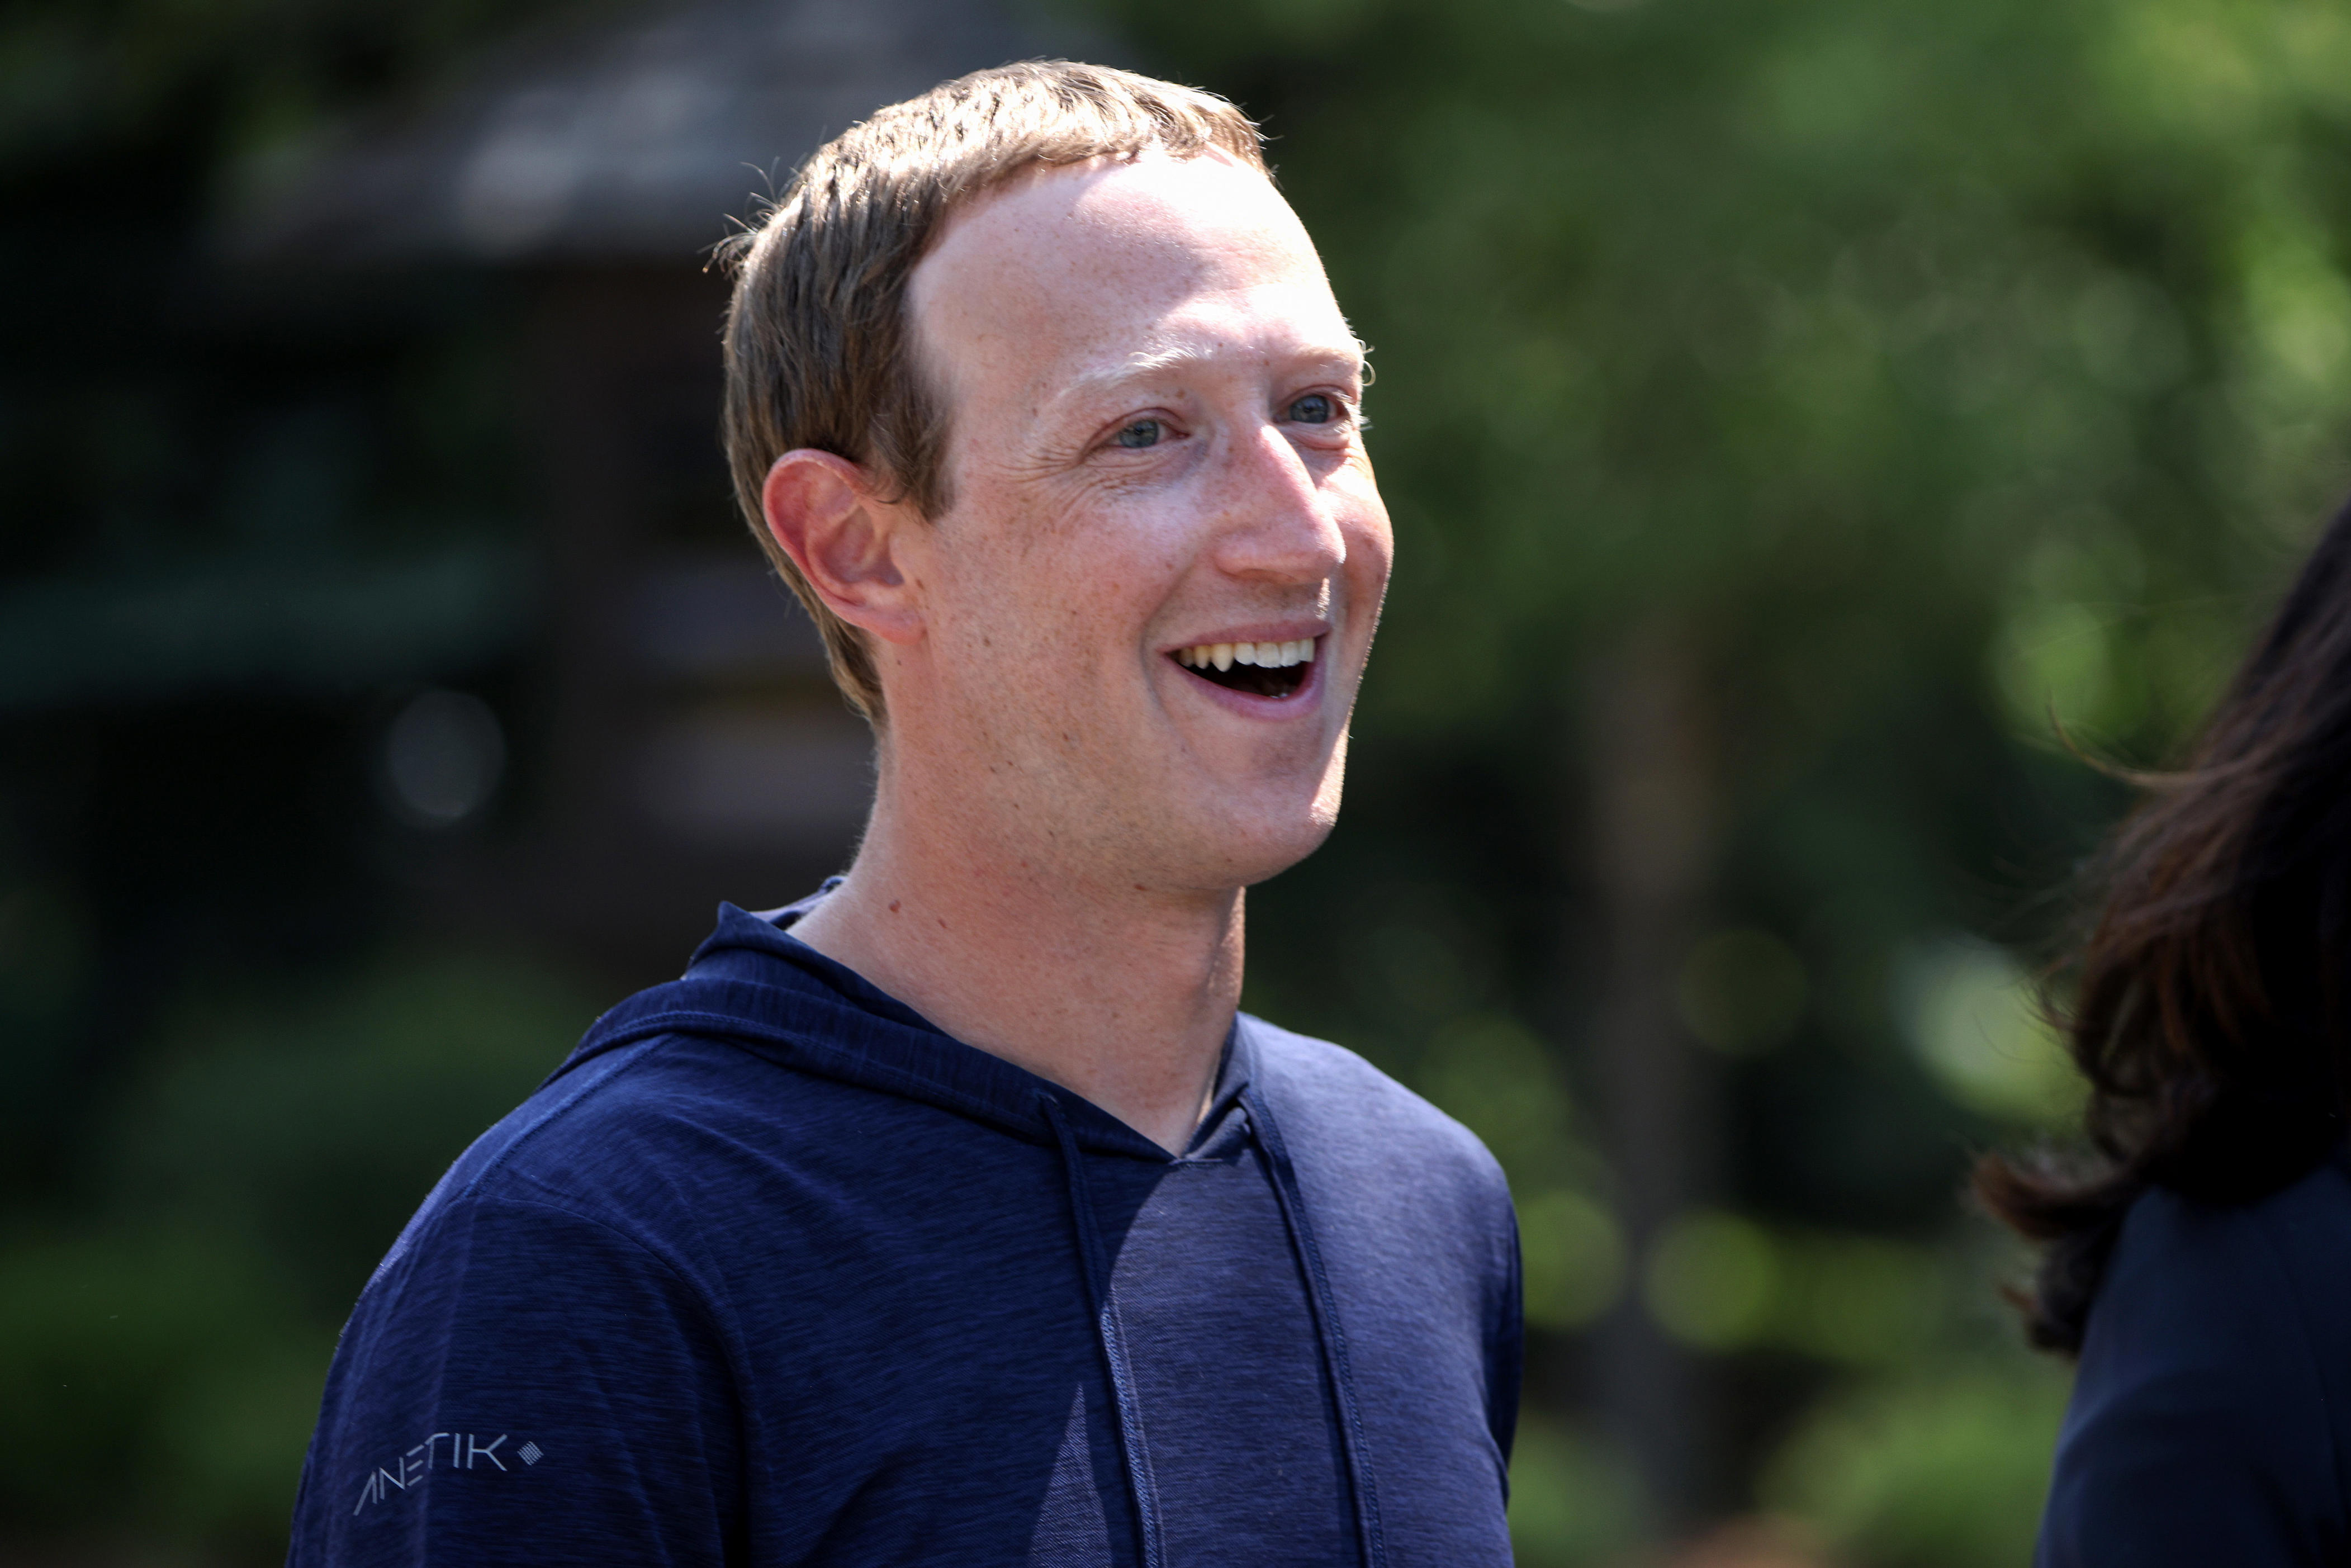 an academic analyzed everything mark zuckerberg said publicly for 20 years — but still doesn't feel like he knows him